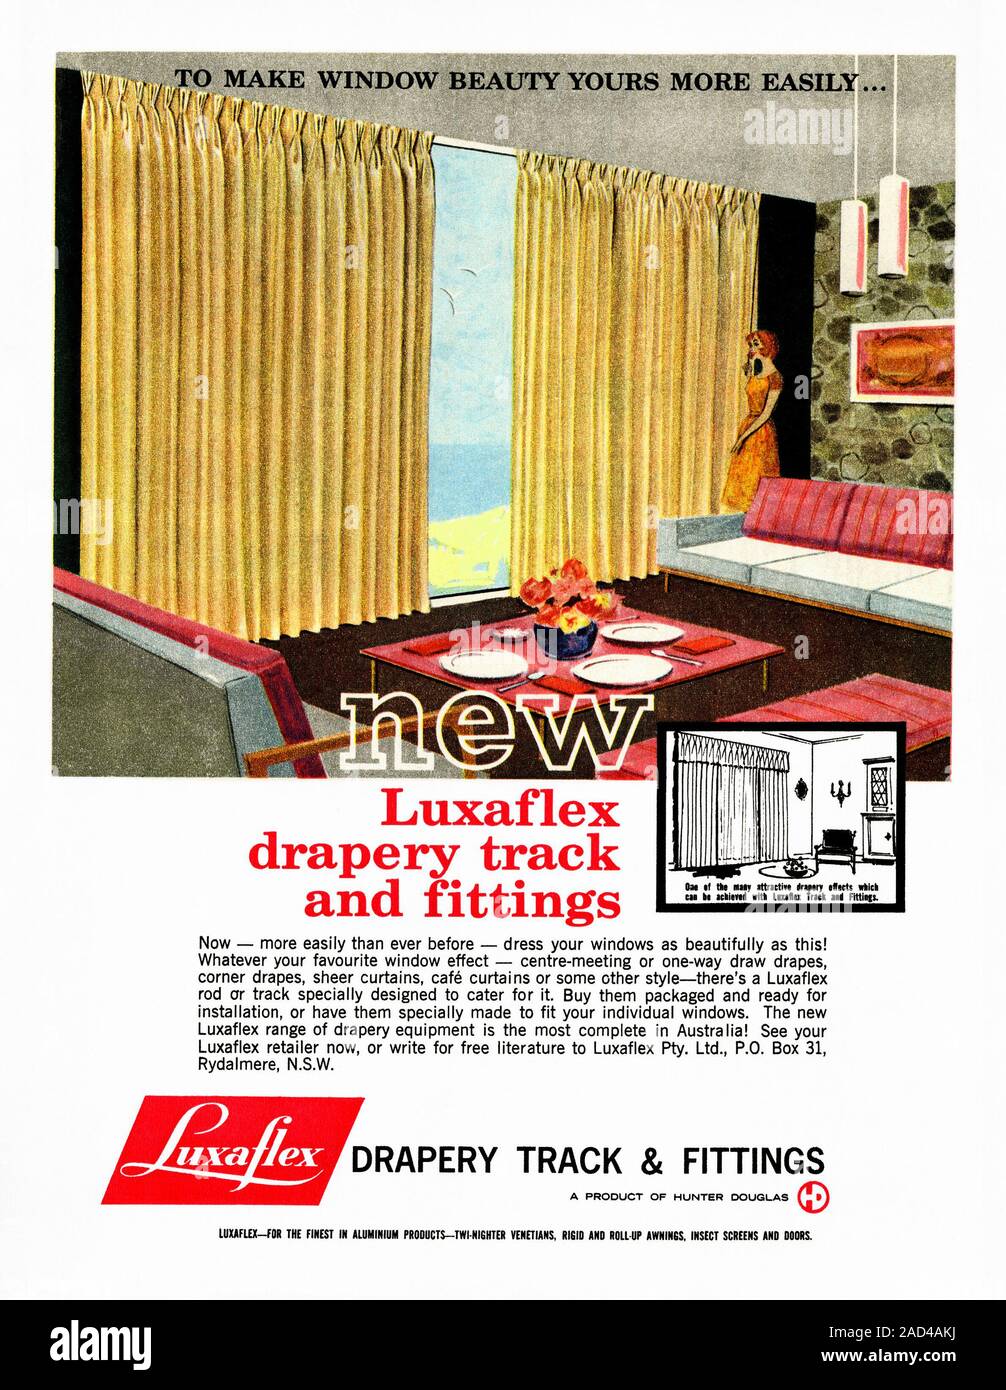 An old advert for Luxaflex curtain (drapery) track and fittings - it appeared in an Australian magazine in 1963. The illustration shows a living room with a woman opening the curtains. The Hunter Douglas Machinery Corporation in Holland introduced their aluminium Venetian Blinds in 1951 under the name Luxaflex. The product was successful around the world. Their range expanded to include indoor blinds, curtain fittings, screens and awnings. Stock Photo